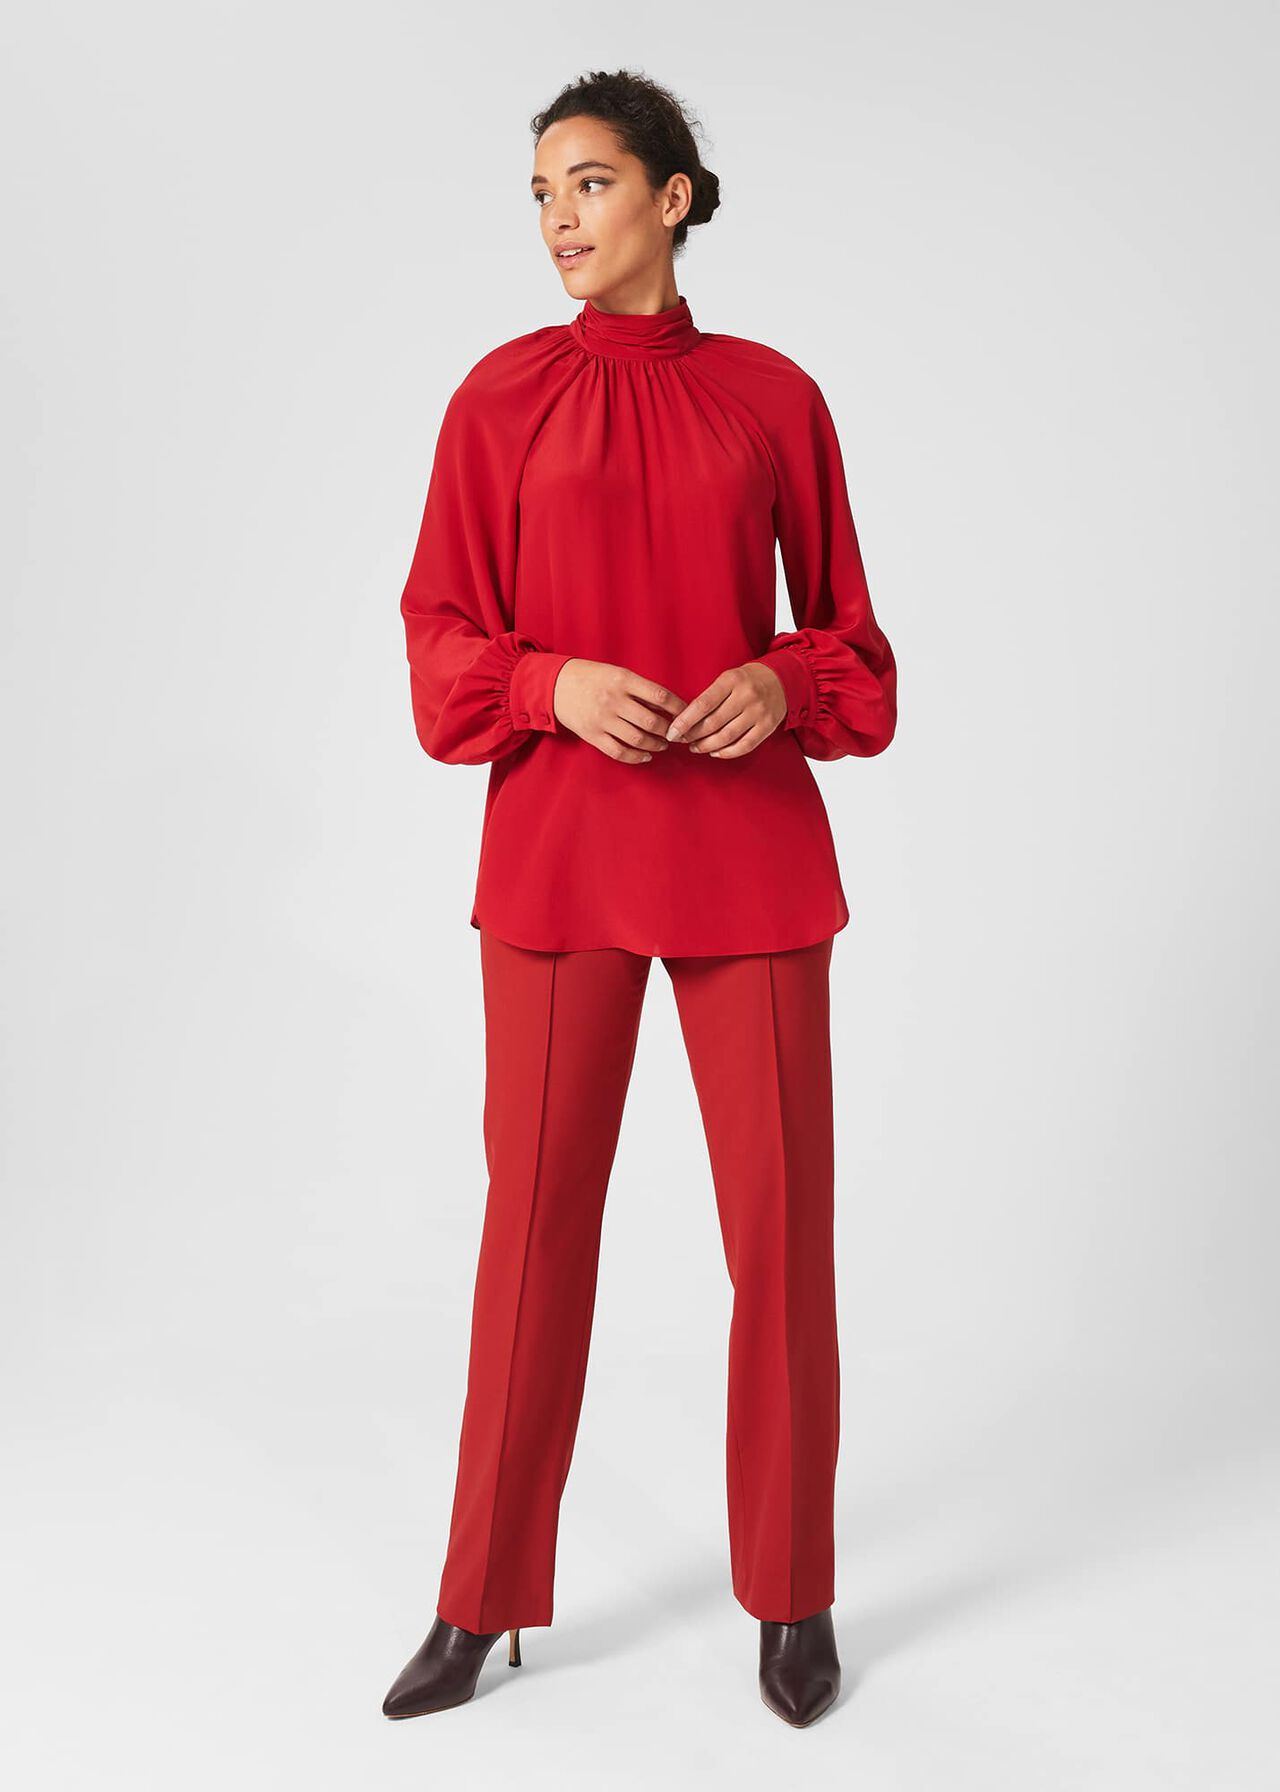 Mollie Silk Blouse, Red, hi-res